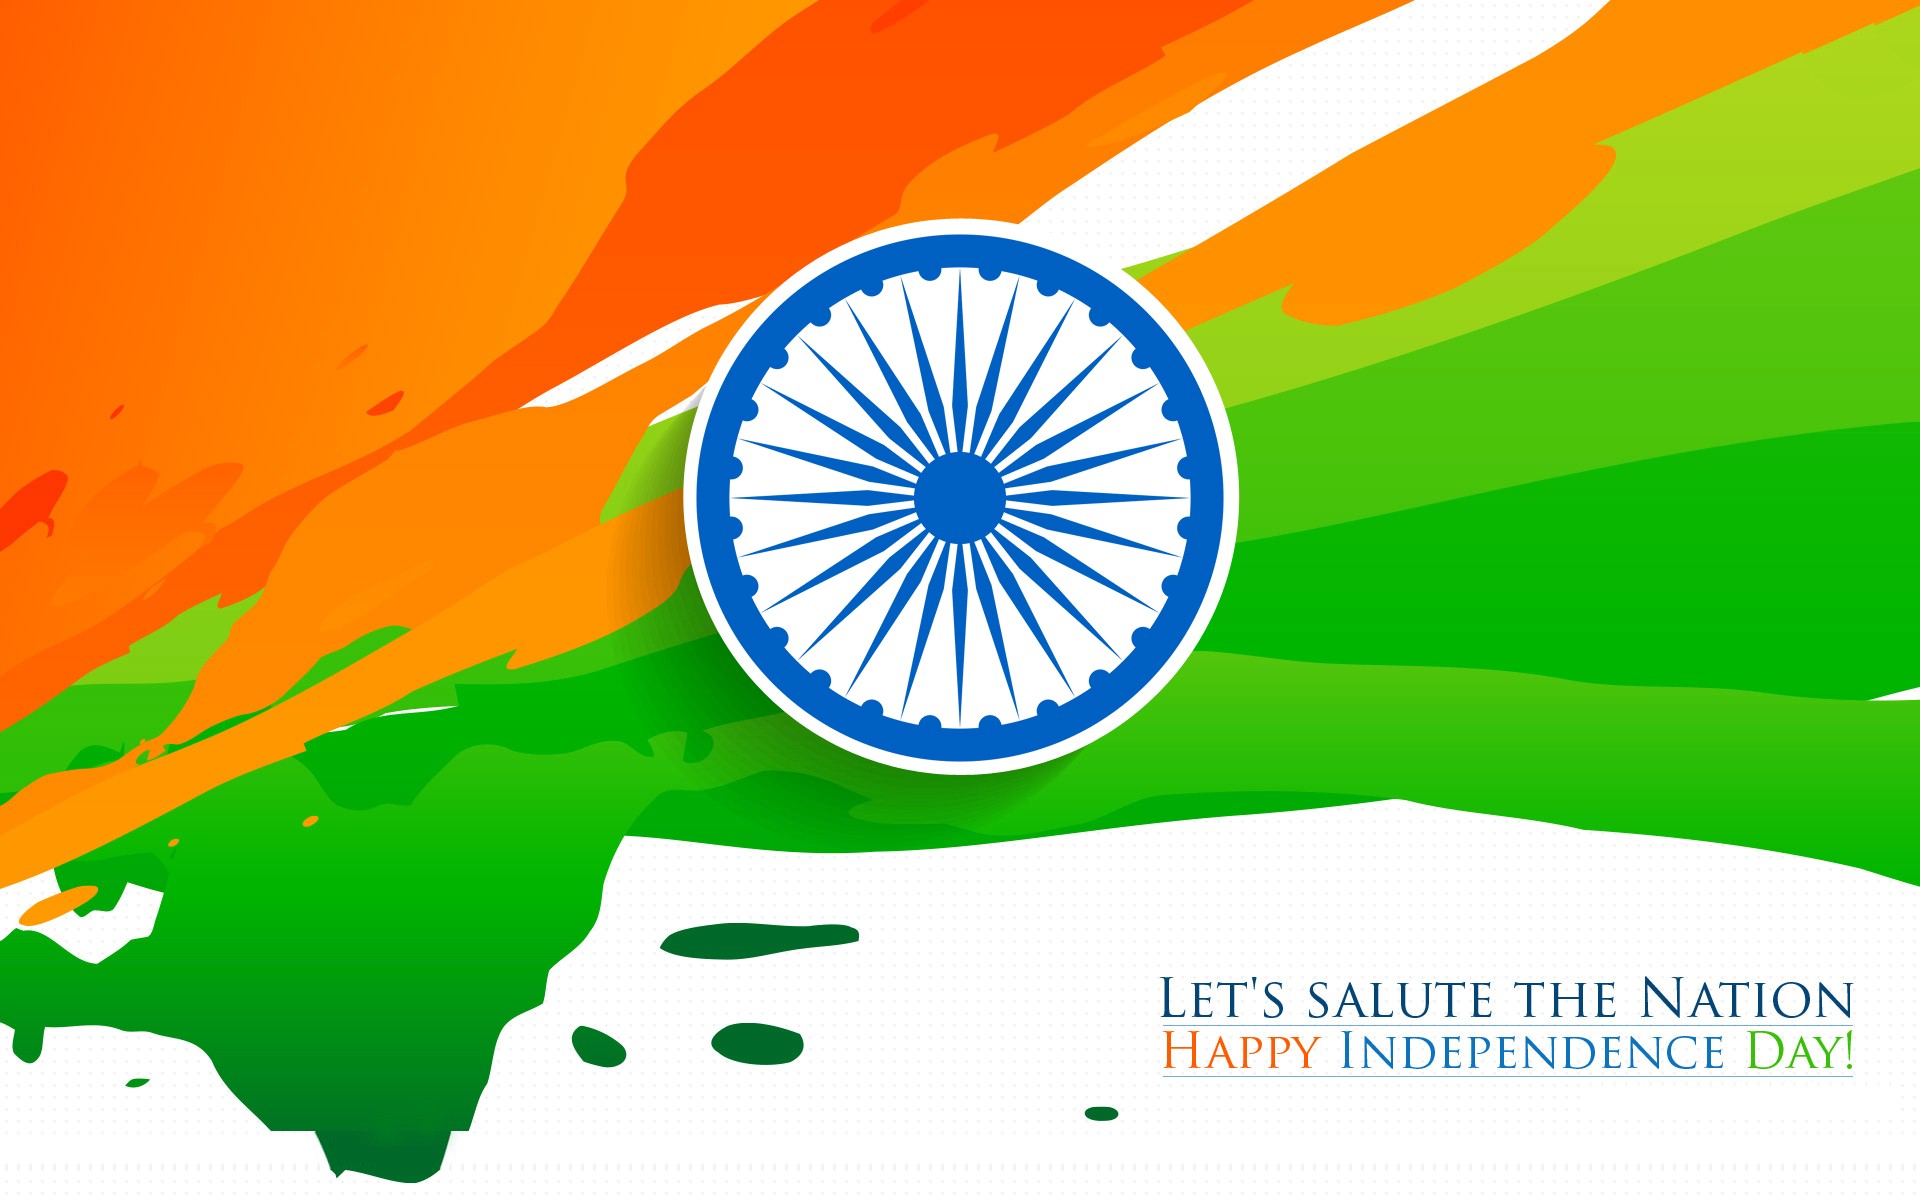 Independence Day Wallpapers | Free Download HD Holidays Desktop Images